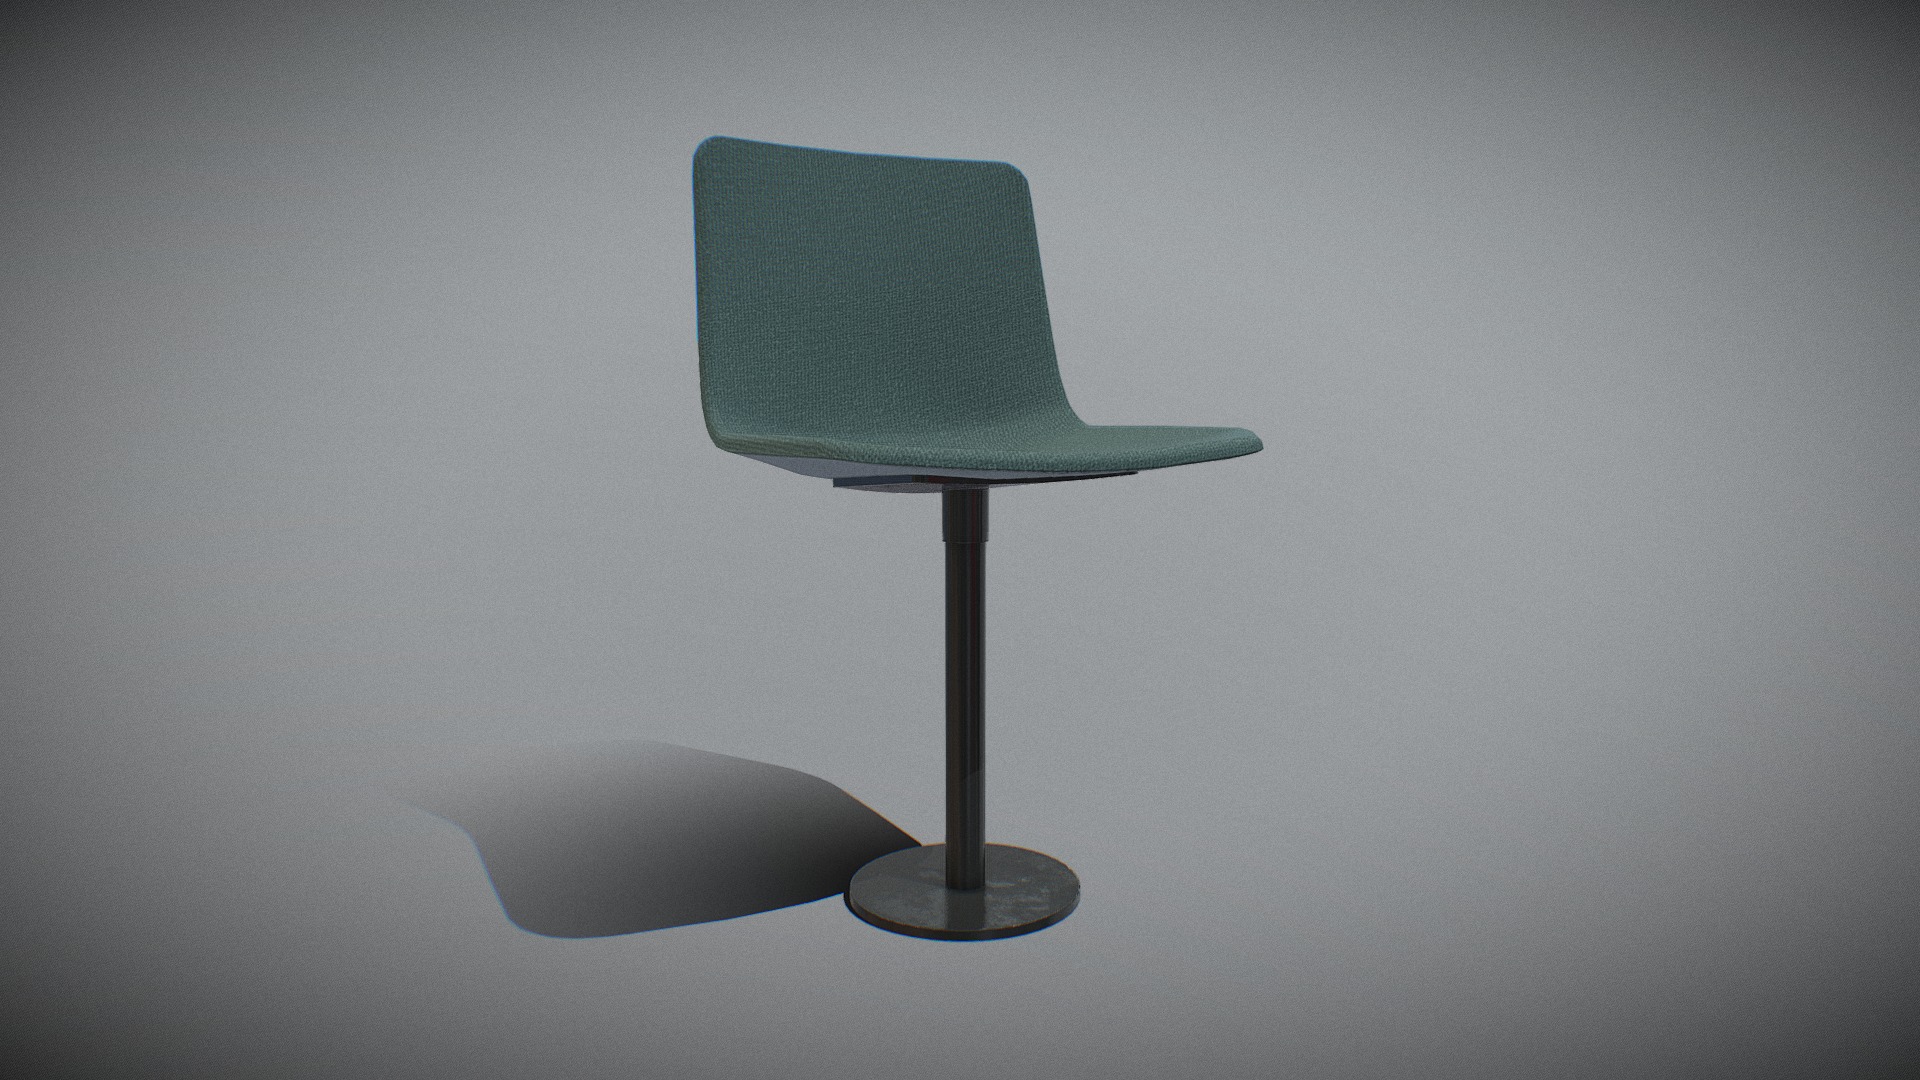 3D model PATO Column Chair-Model 4082 Ancient green - This is a 3D model of the PATO Column Chair-Model 4082 Ancient green. The 3D model is about a green chair with a shadow.